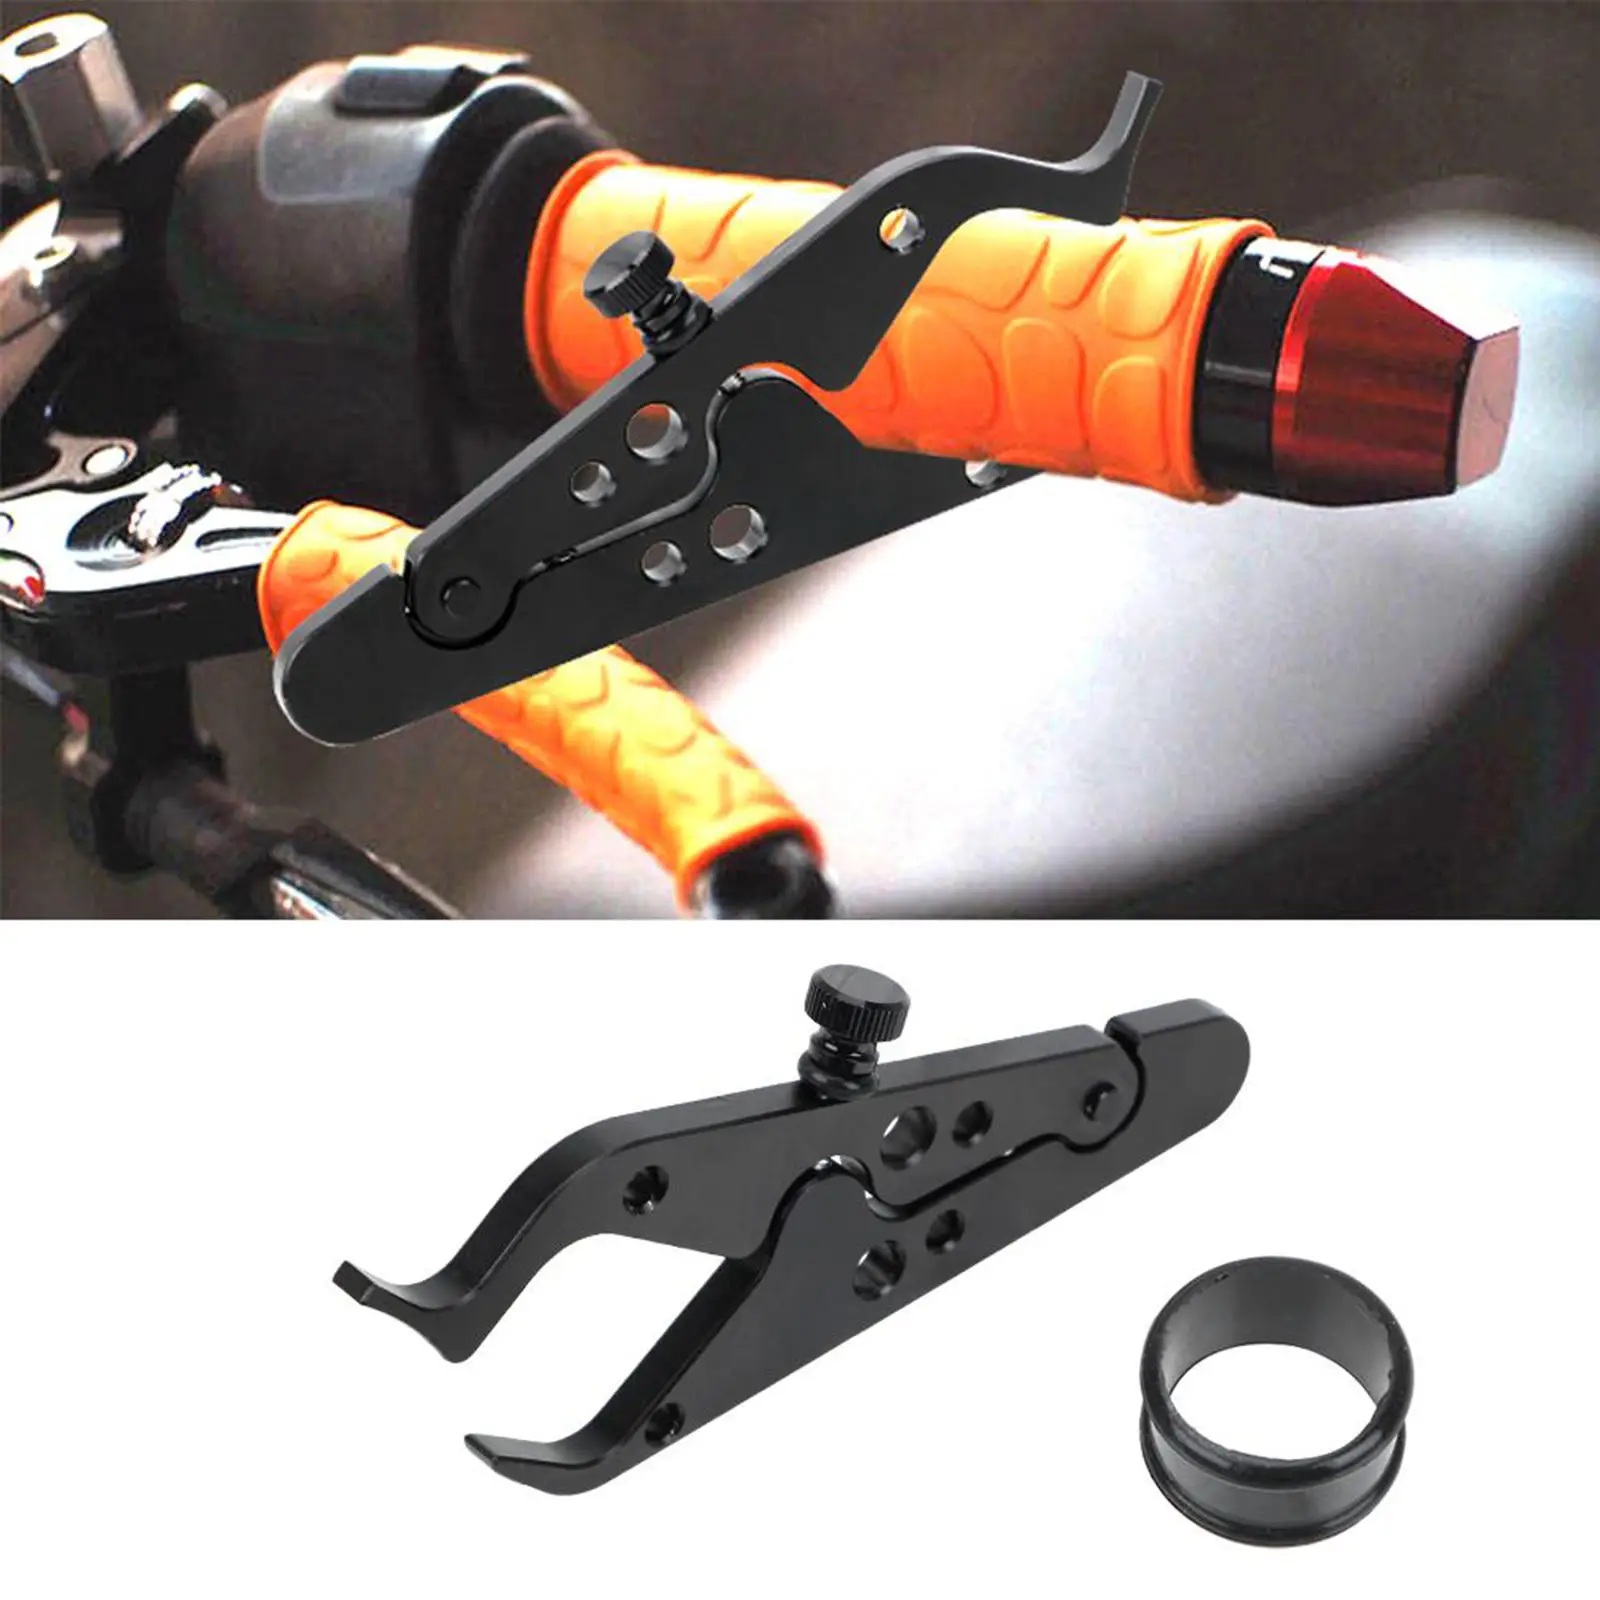 Motorcycle Throttle Lock Wrist/Hand Cruise Control Clamp Easy to Adjust